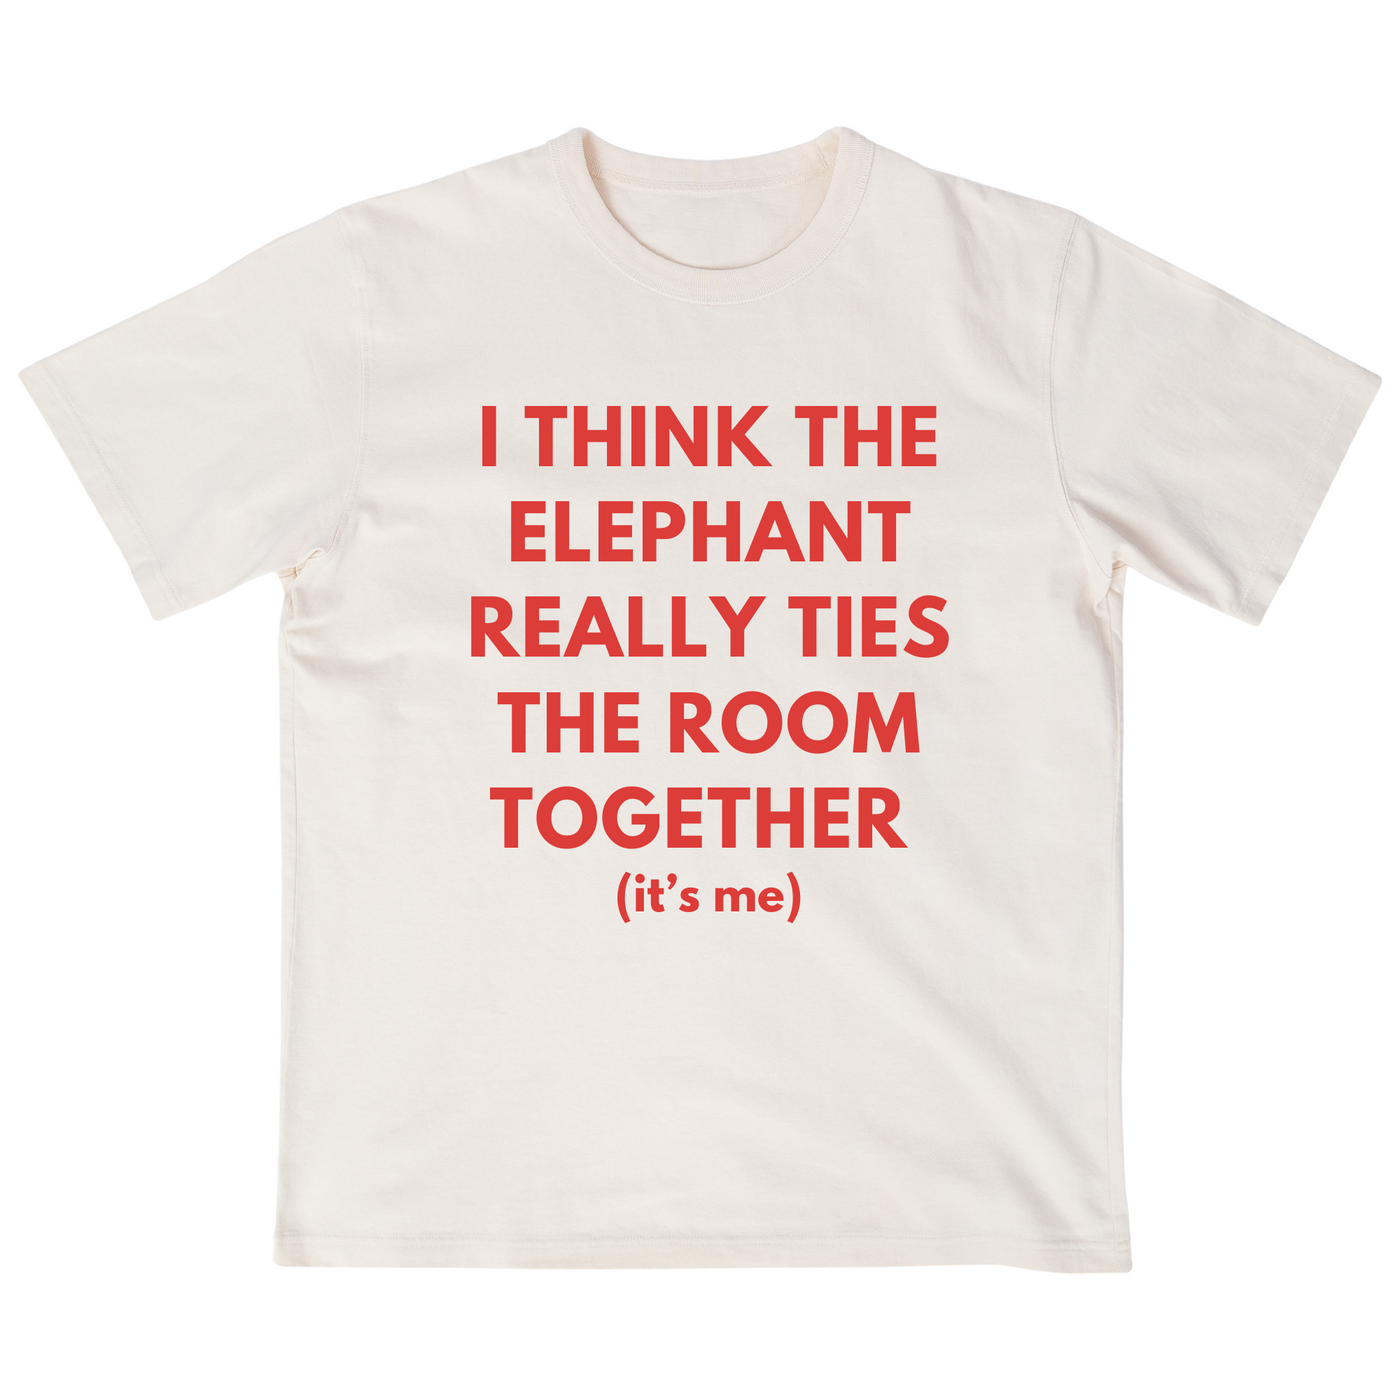 I Think The Elephant Really Ties The Room Together (it's me)